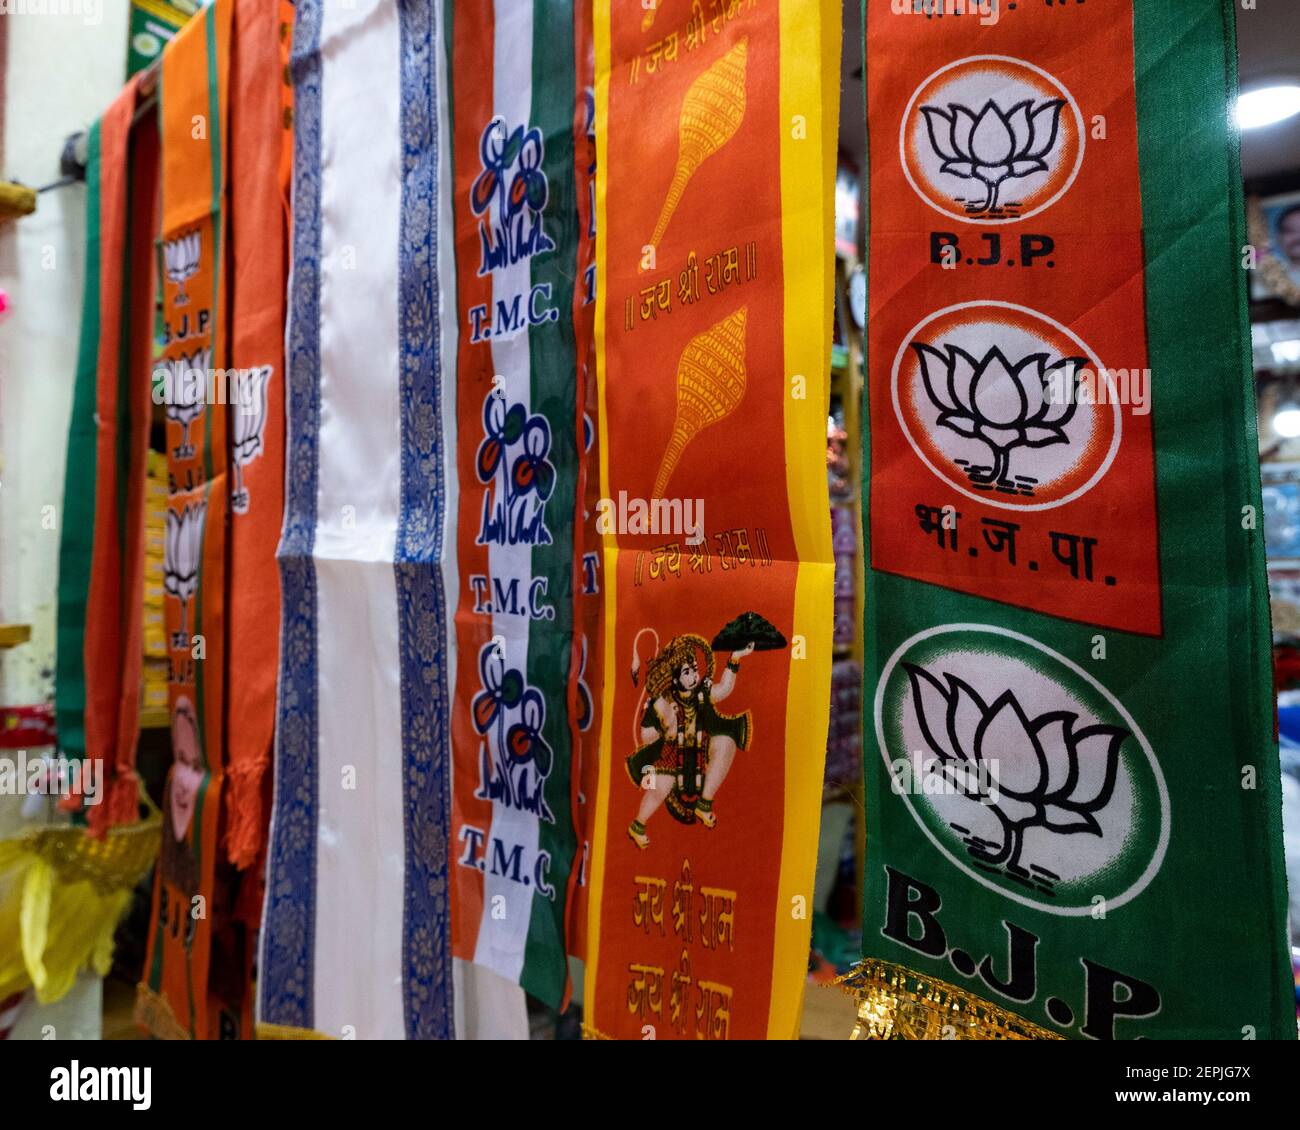 National flags seen displayed in a shopduring the election preparation. Various political campaign products, flags are on display for sale prior to the West Bengal legislative Assembly Election 2021. Stock Photo